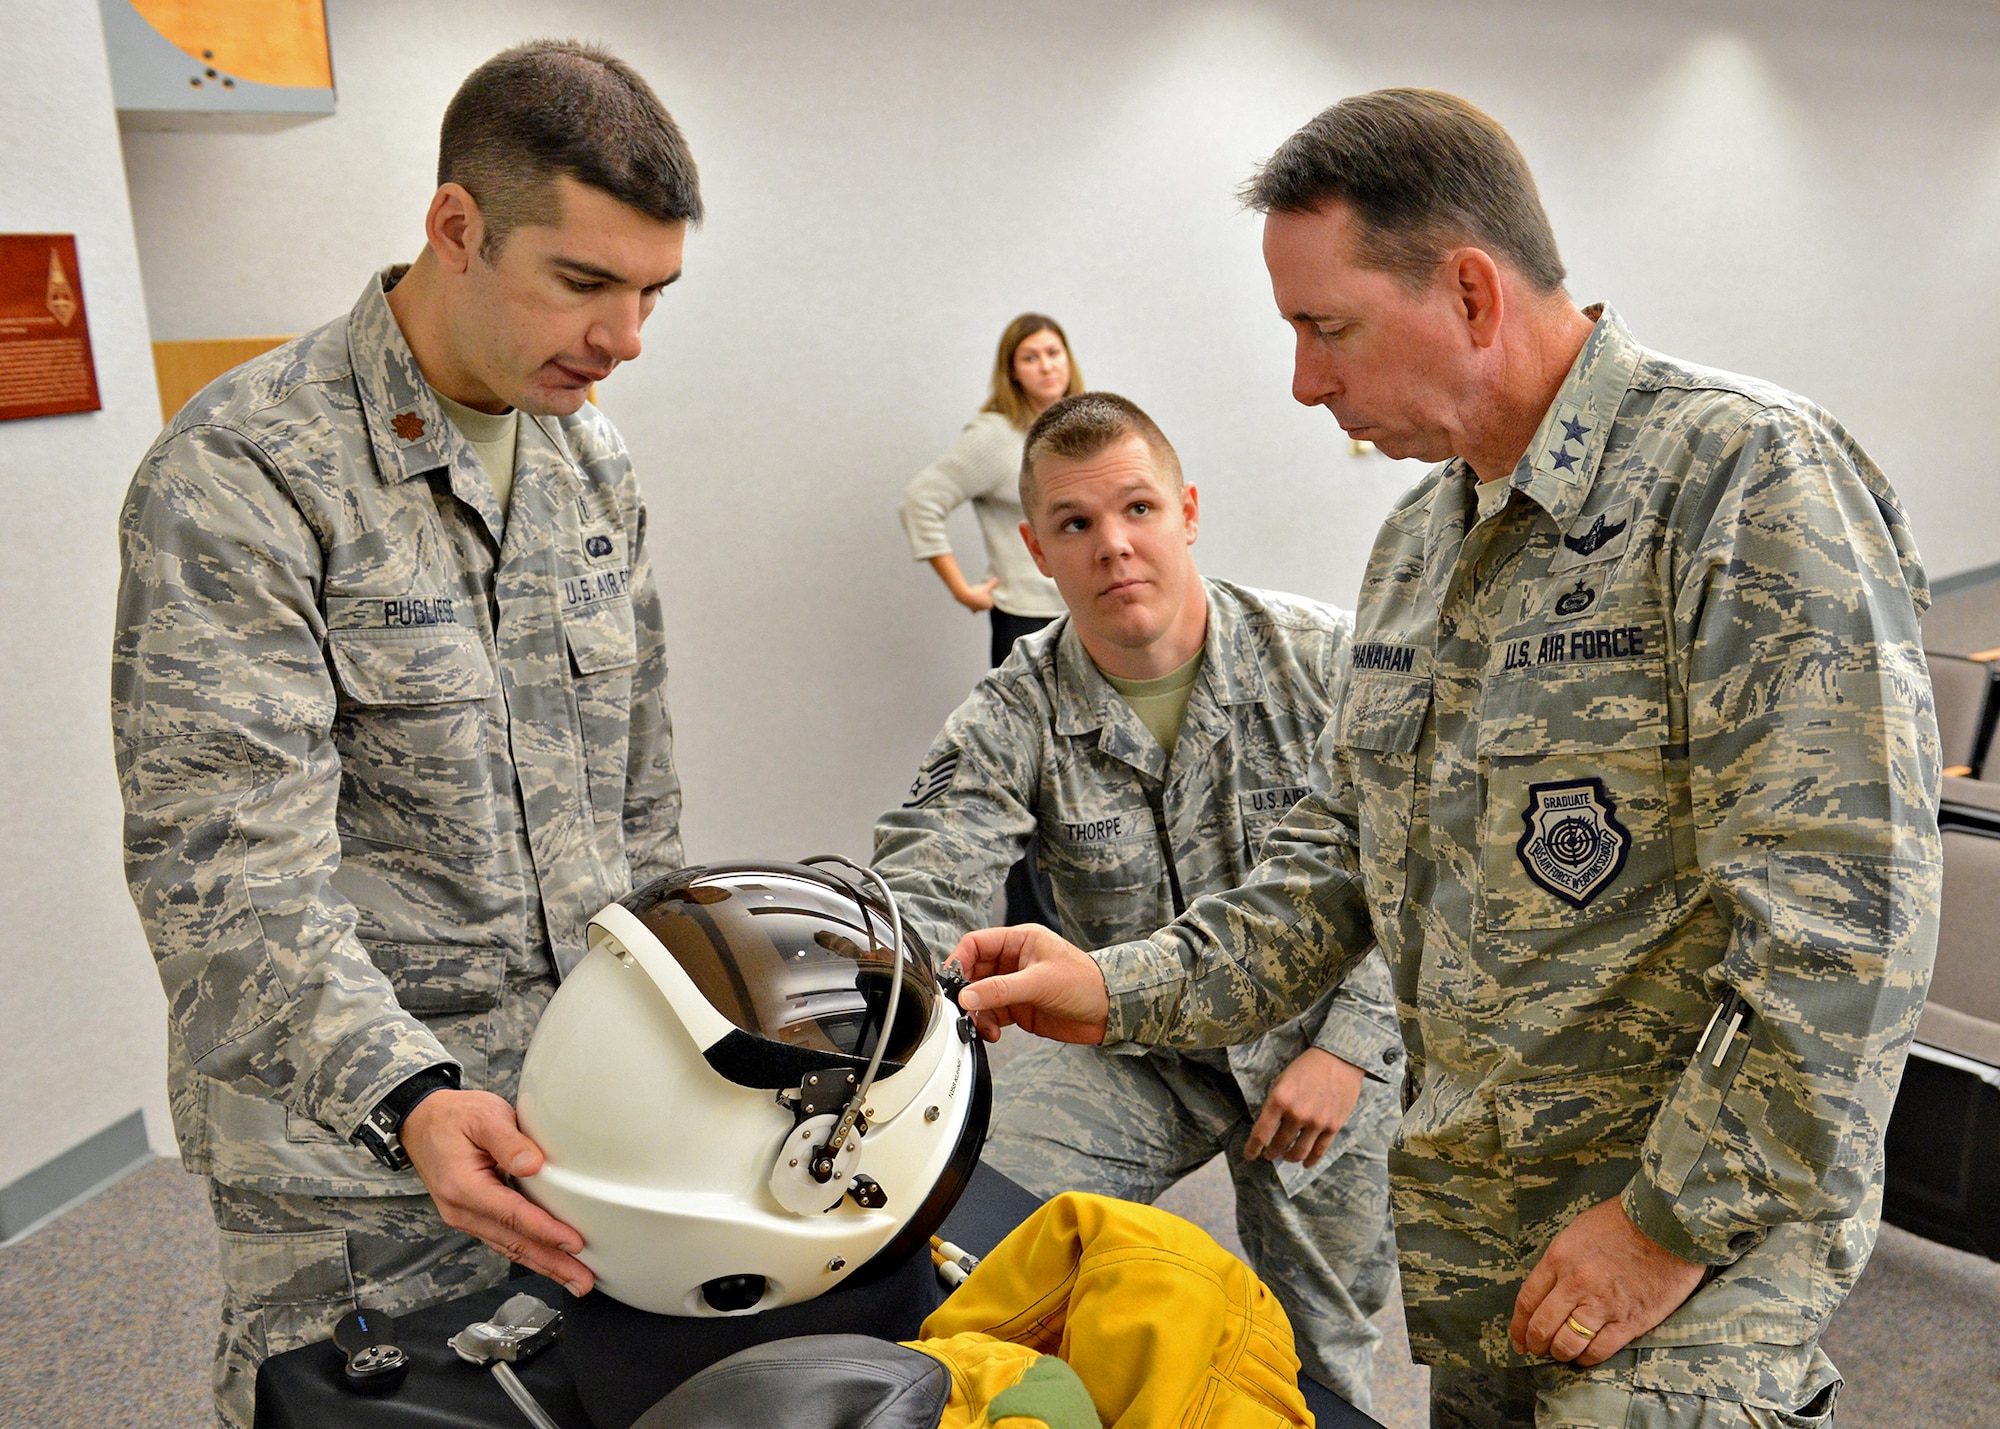 Maj. Gen. John Shanahan, 25th Air Force commander, visits the 9th Physiological Support Squadron during his visit to Beale Air Force Base, Calif., Oct. 15, 2014. Shanahan was briefed on the pressure suit as part of preparation before the general received a flight in the U-2 Dragon Lady. (U.S Air Force photo by John Schwab/Released)